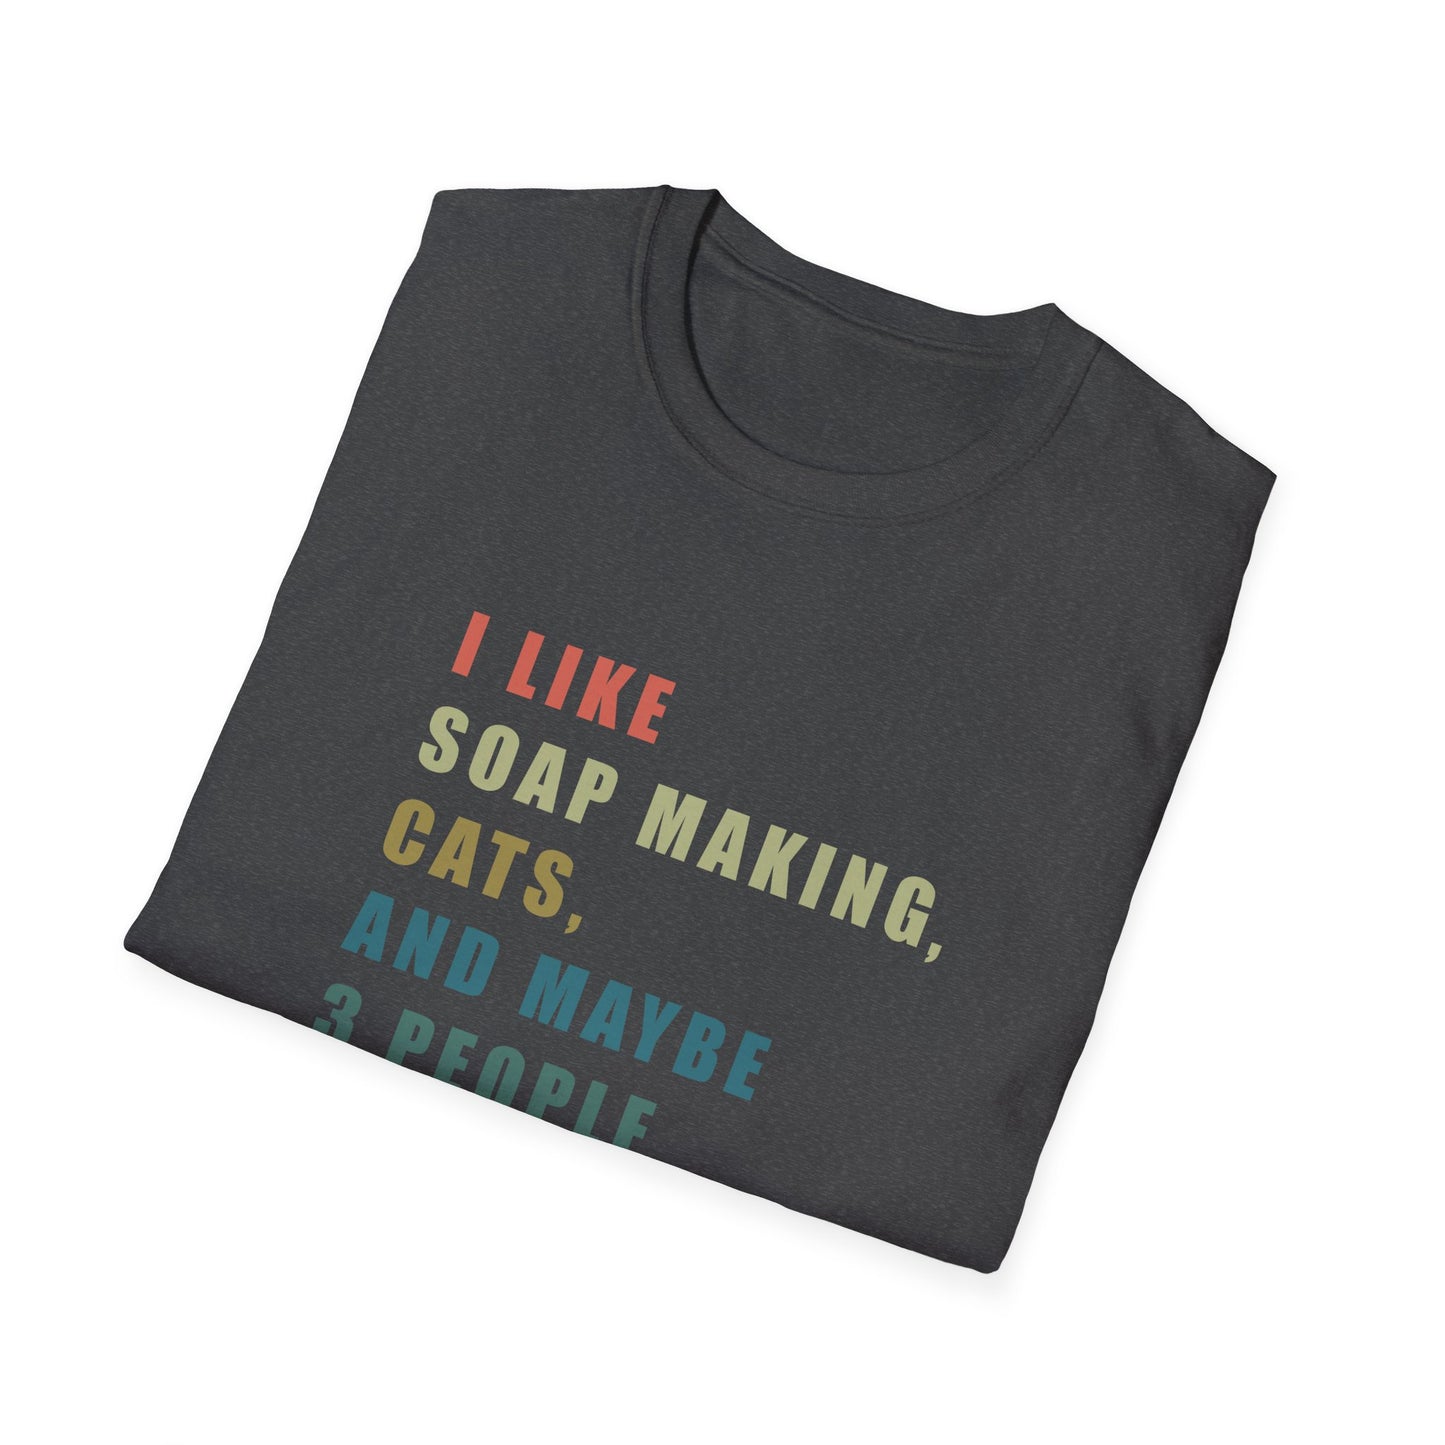 I Like Soap Making, Cats, and Maybe 3 People T-Shirt